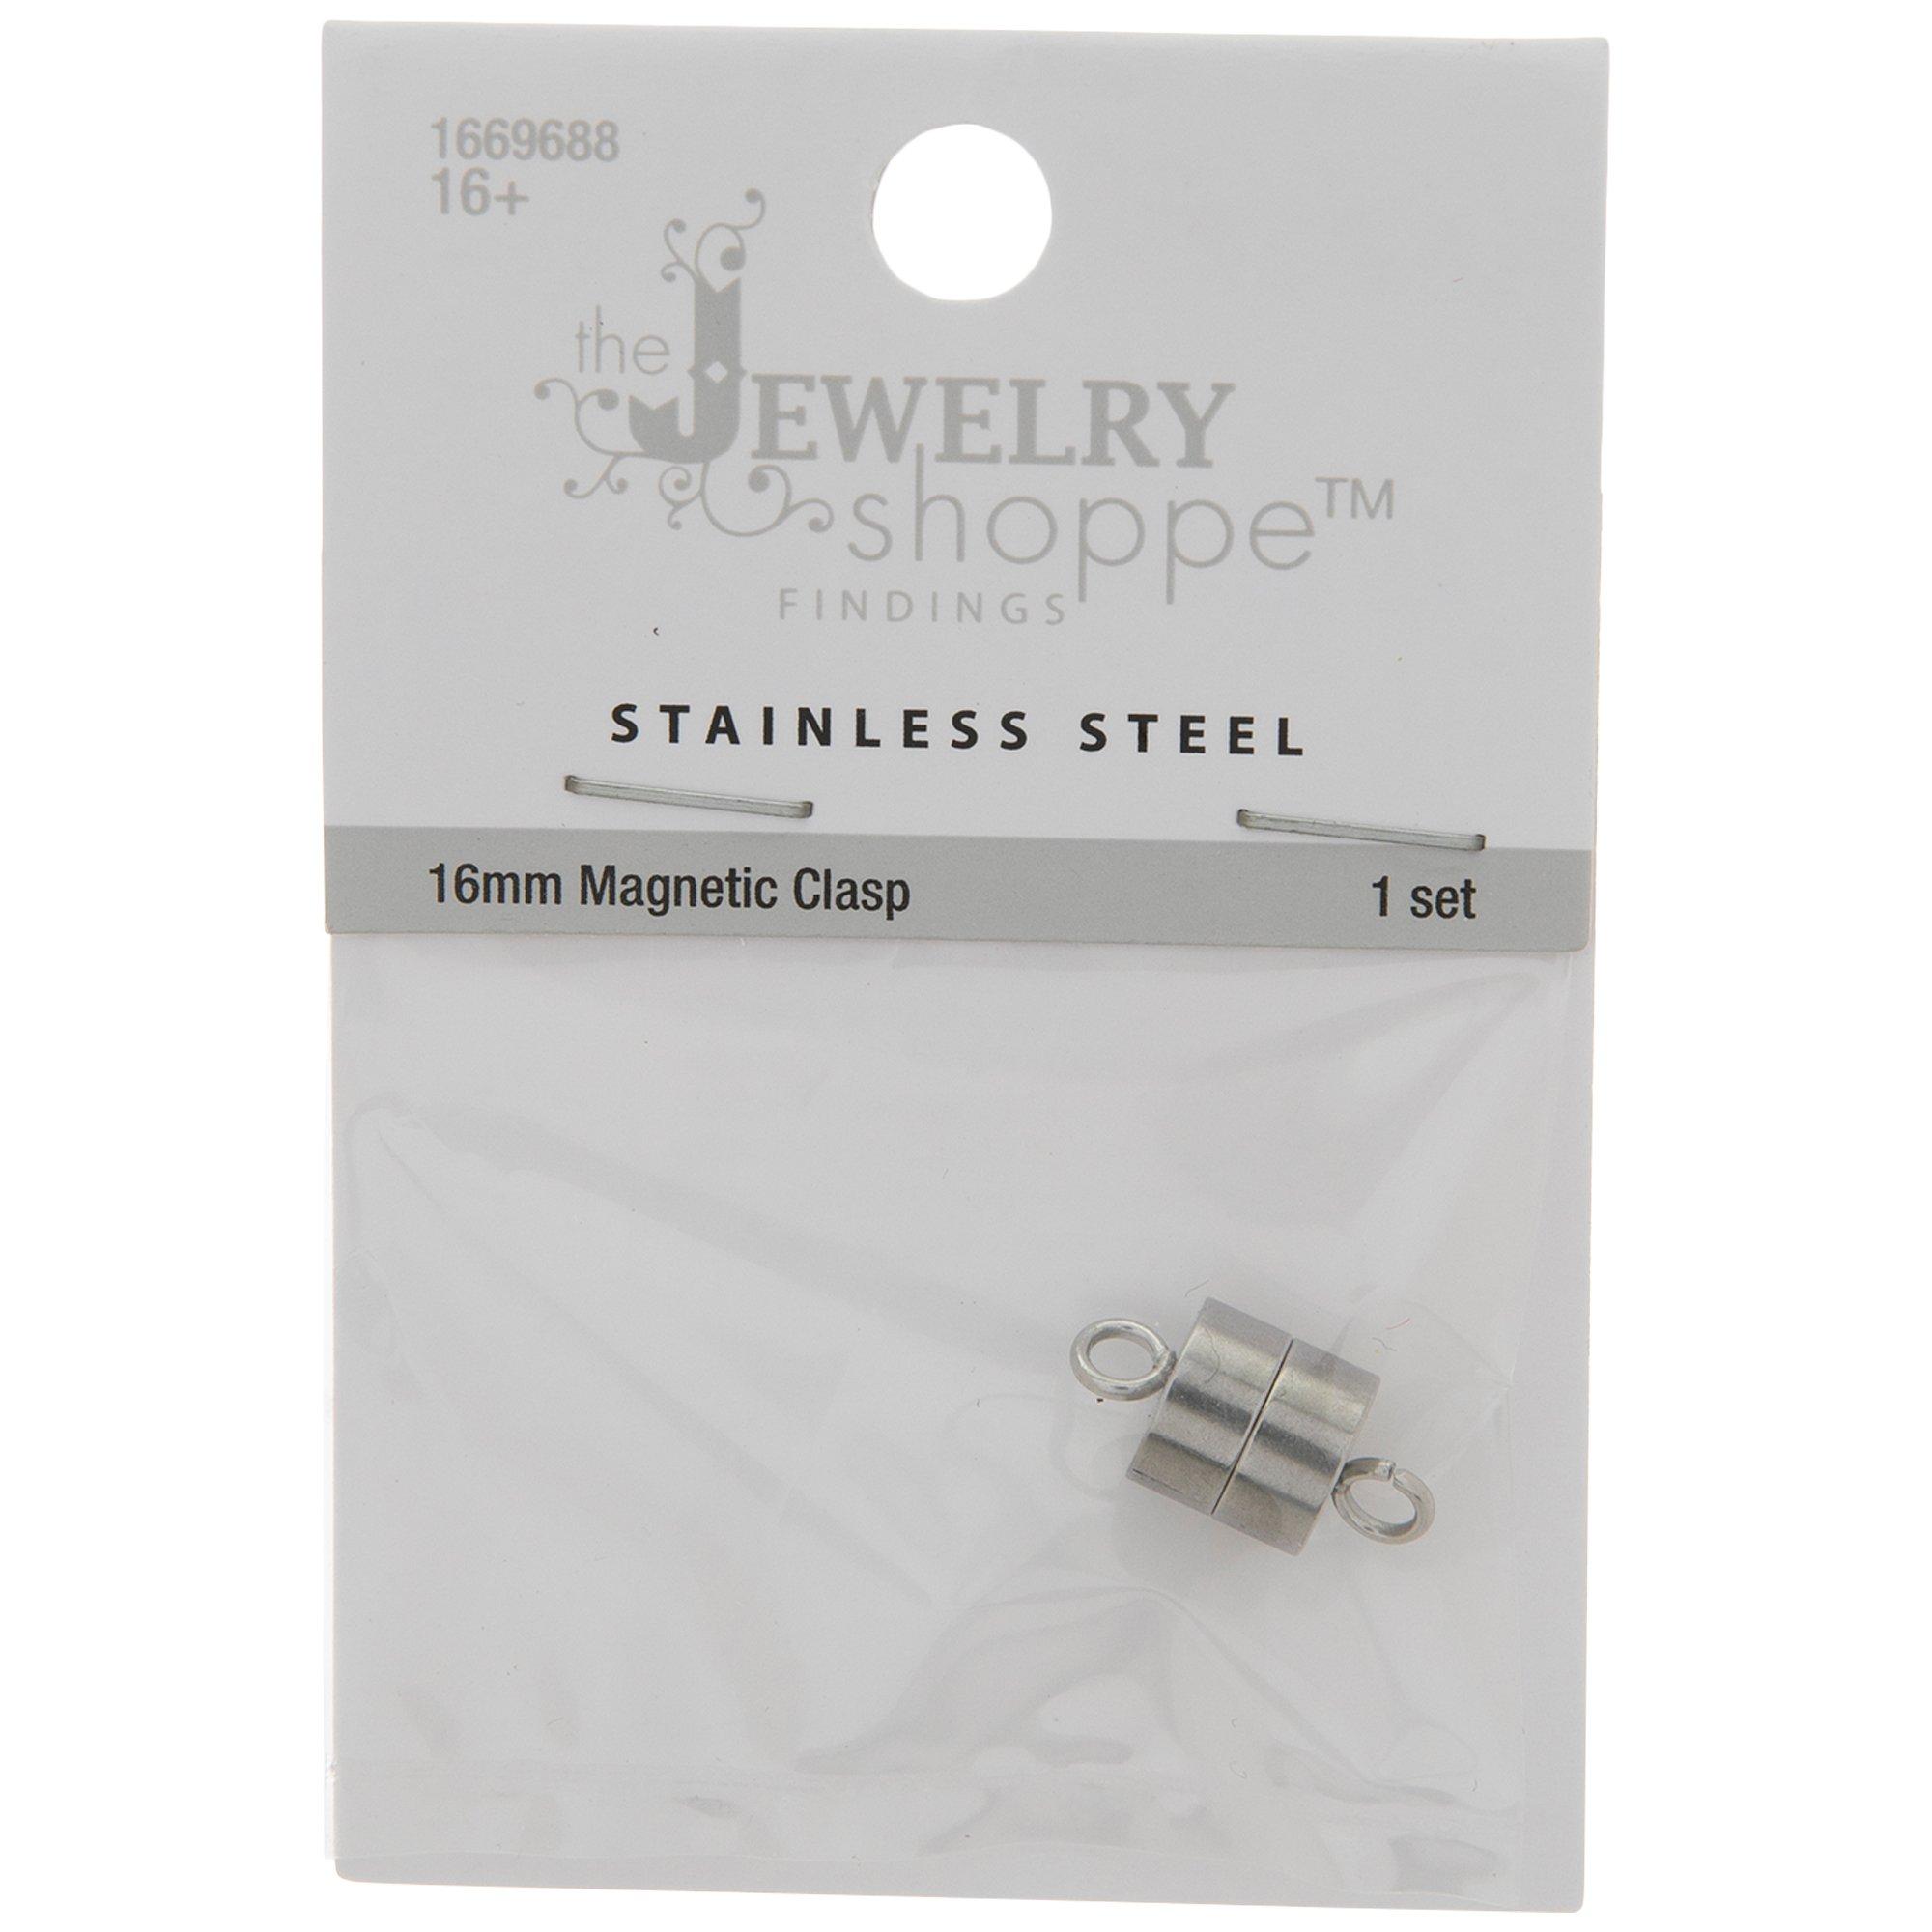 Stainless Steel Magnetic Ball Clasp 8mm - 1 set